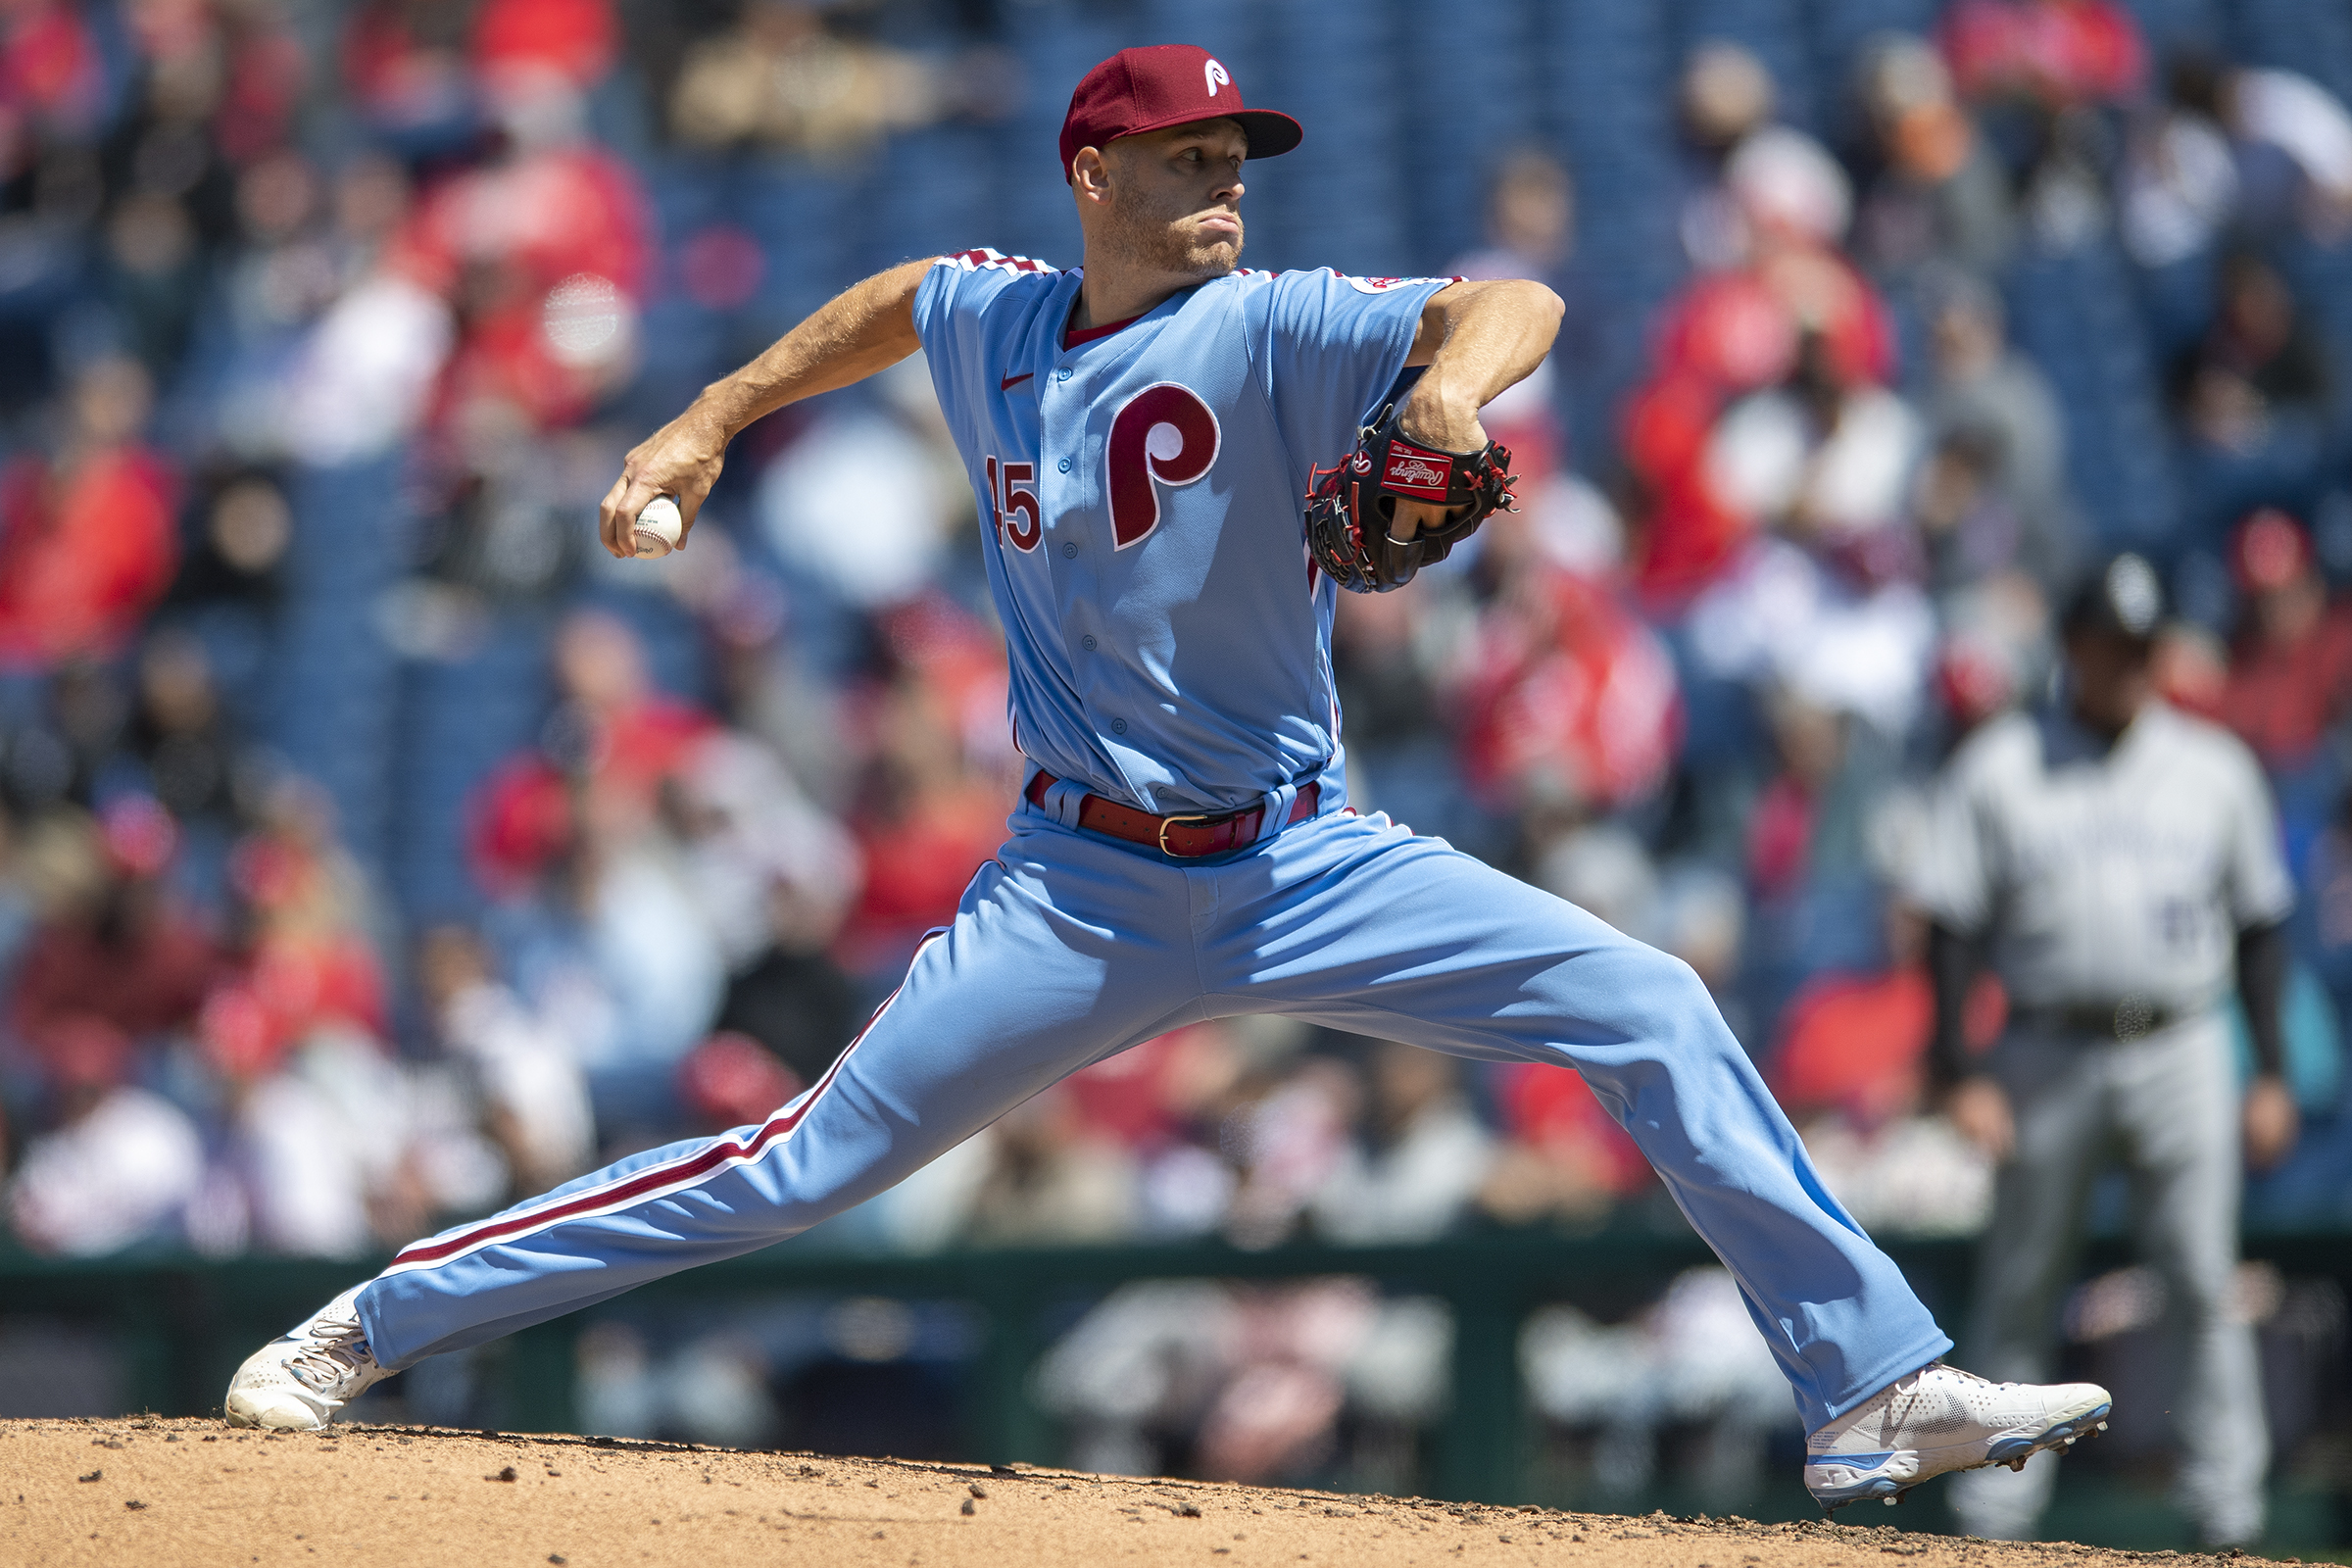 Phillies finish 4-game sweep of Rockies behind ace Wheeler